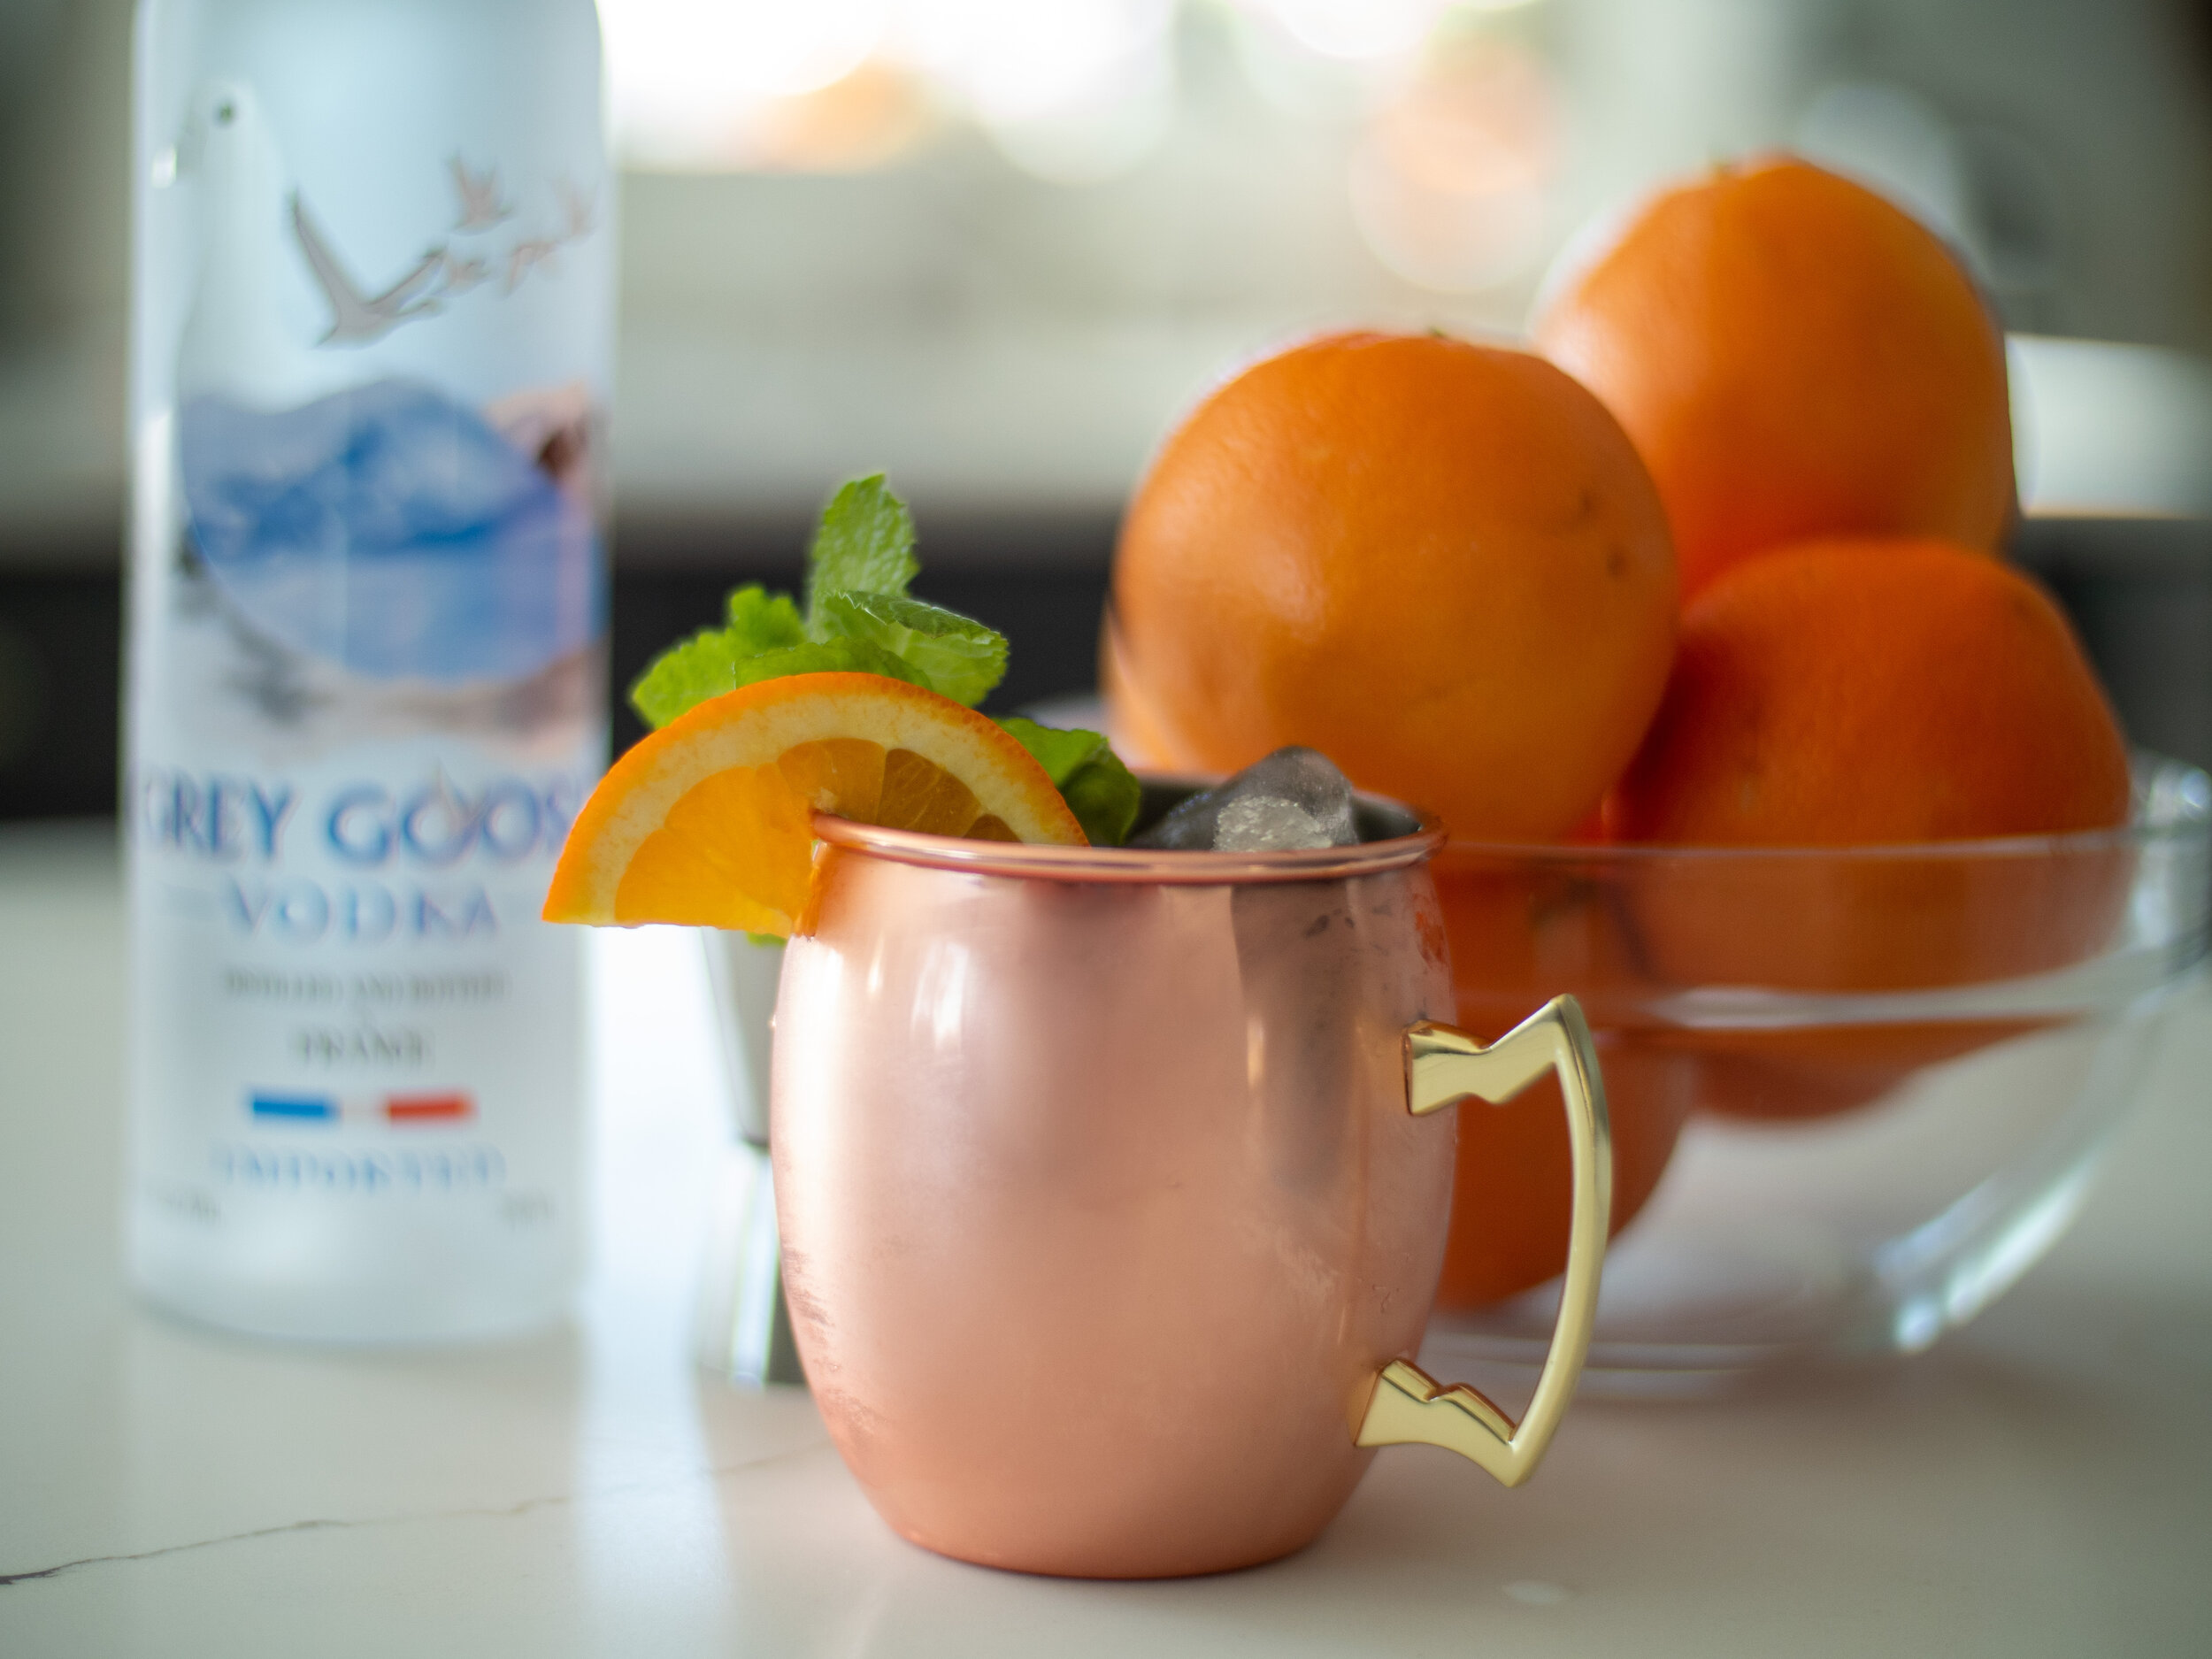   Dale Moss’s Game Day Mule   Ingredients:  1 ½ oz Grey Goose&nbsp;Vodka  ½ oz Martini Riserve Rubino  ½ oz Lime Juice  Fever Tree Spice Orange Ginger ale  Orange wedge   Combine the first three ingredients in a cocktail shaker. Shake and pour over i